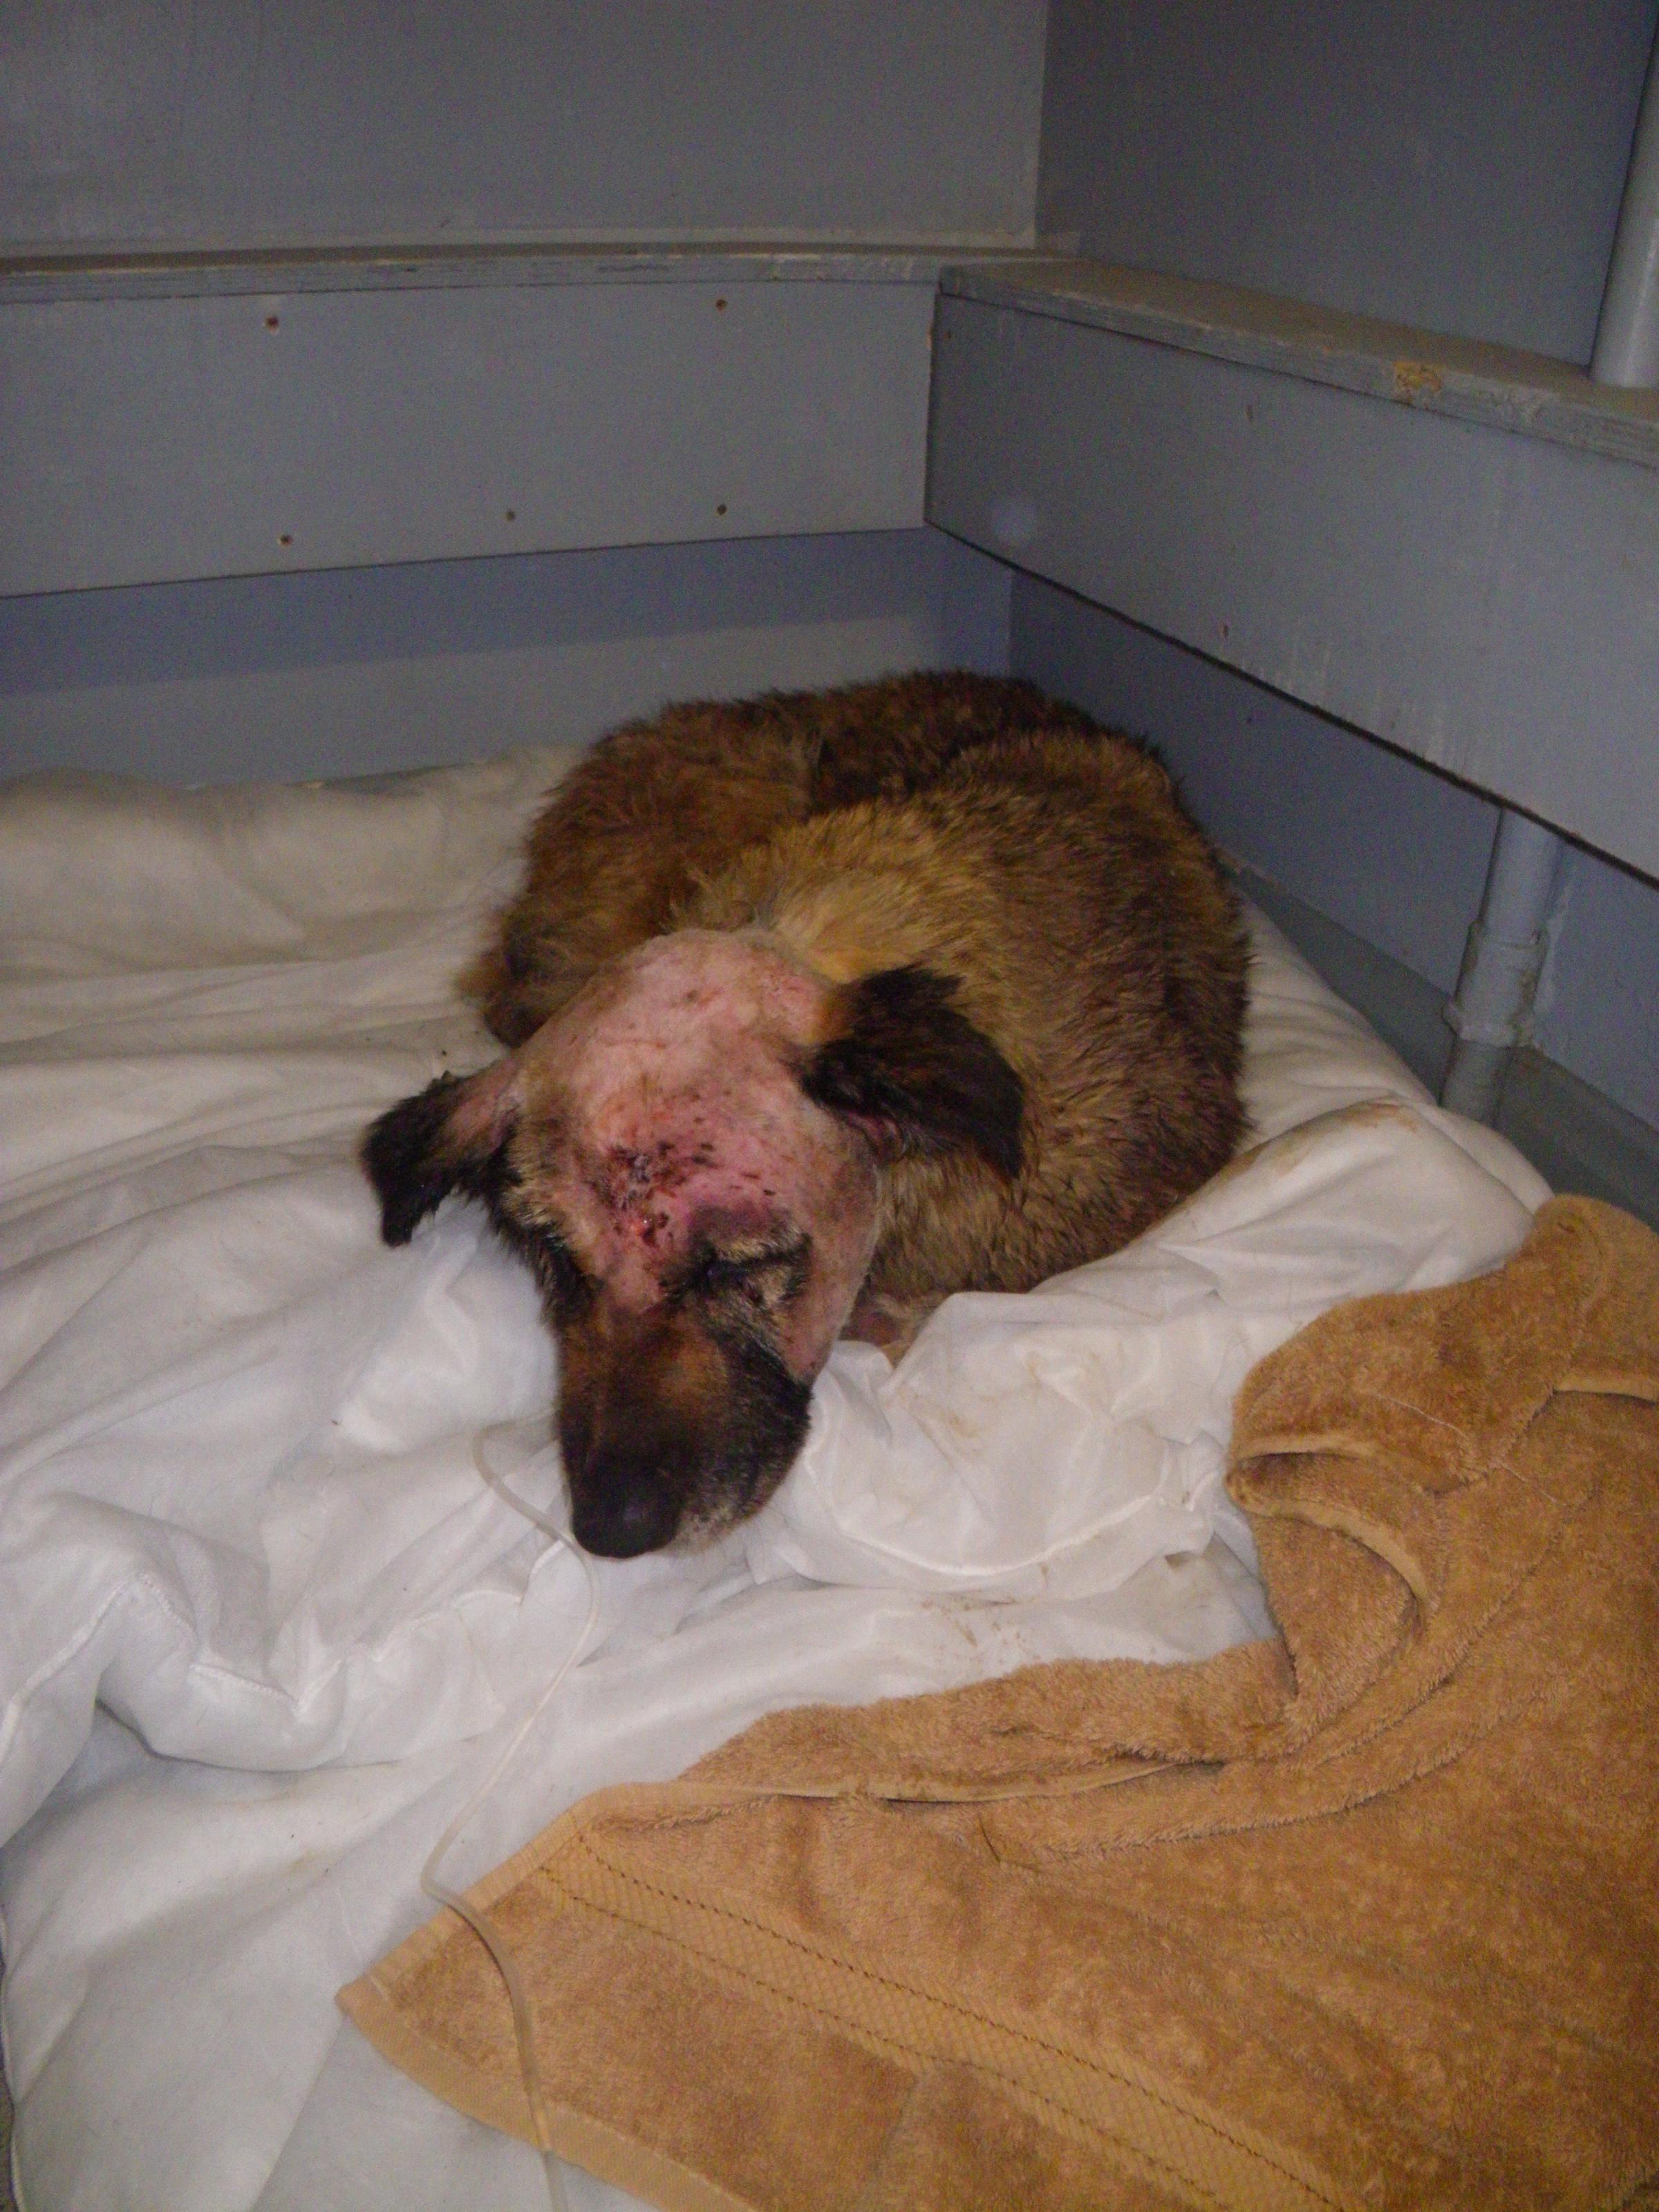 PICTURED: Bexley dog, starved and bitten, rescued at cricket ground